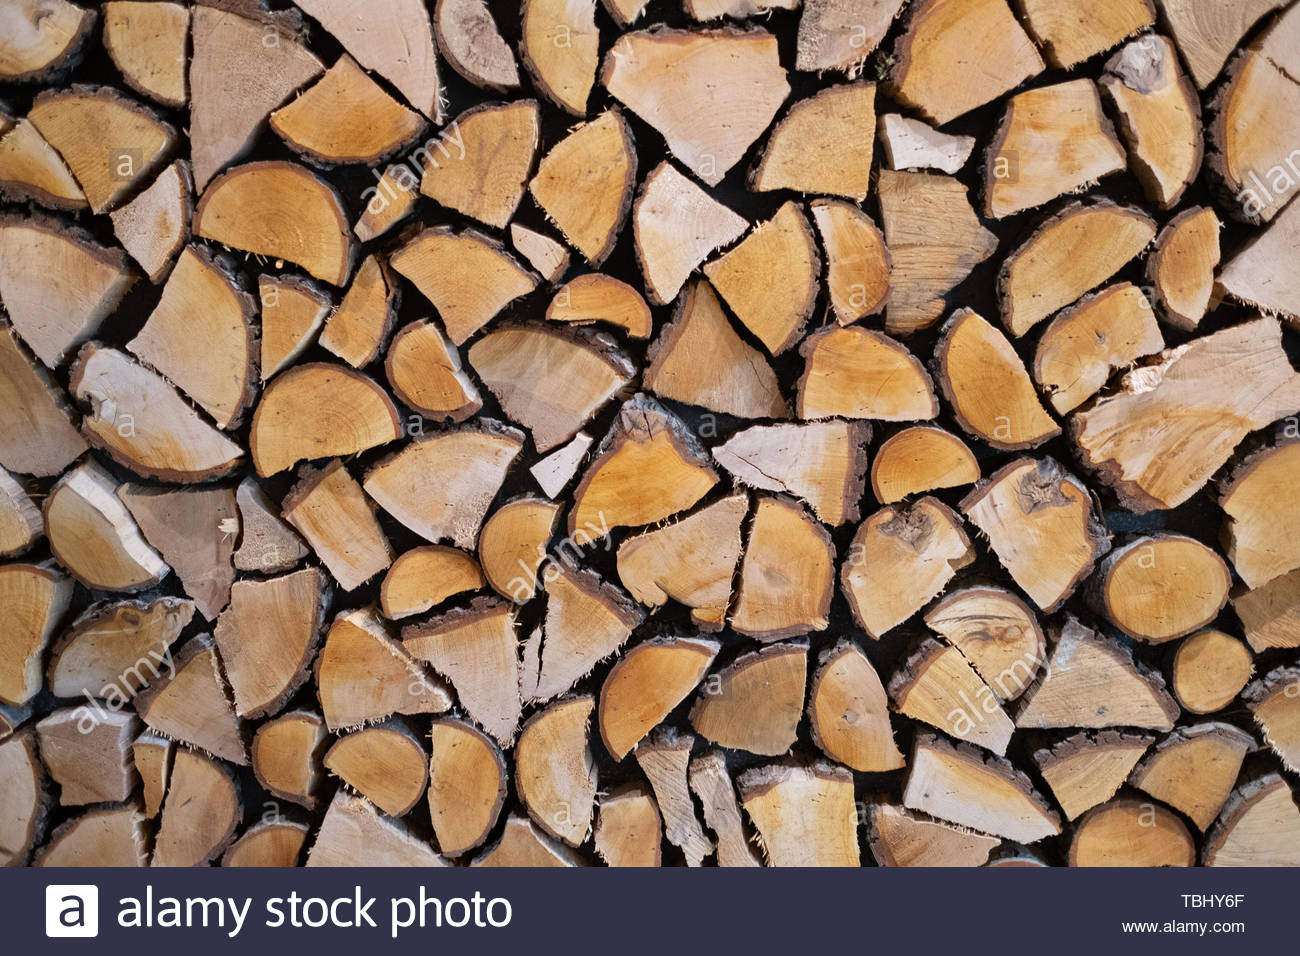 Wall Firewood Background Of Dry Chopped Logs In A Pile